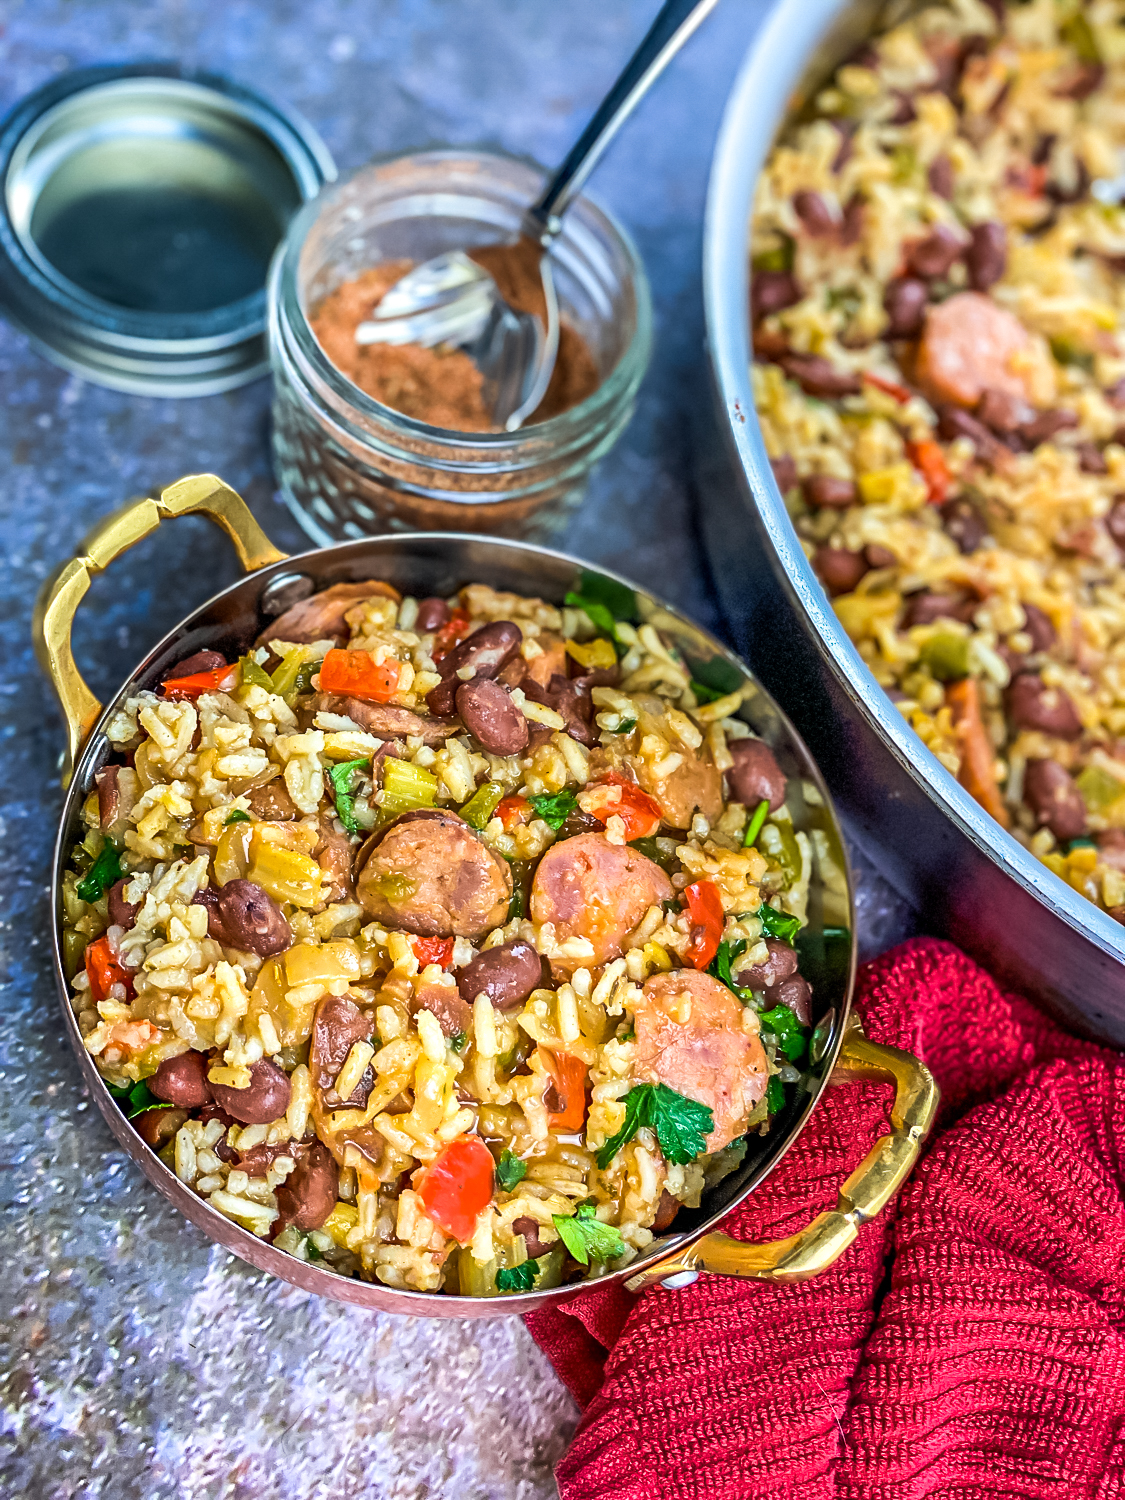 Whether you're in a hurry or have all day, this easy Cajun red beans and rice with sausage recipe is sure to please as a tasty meal or side.